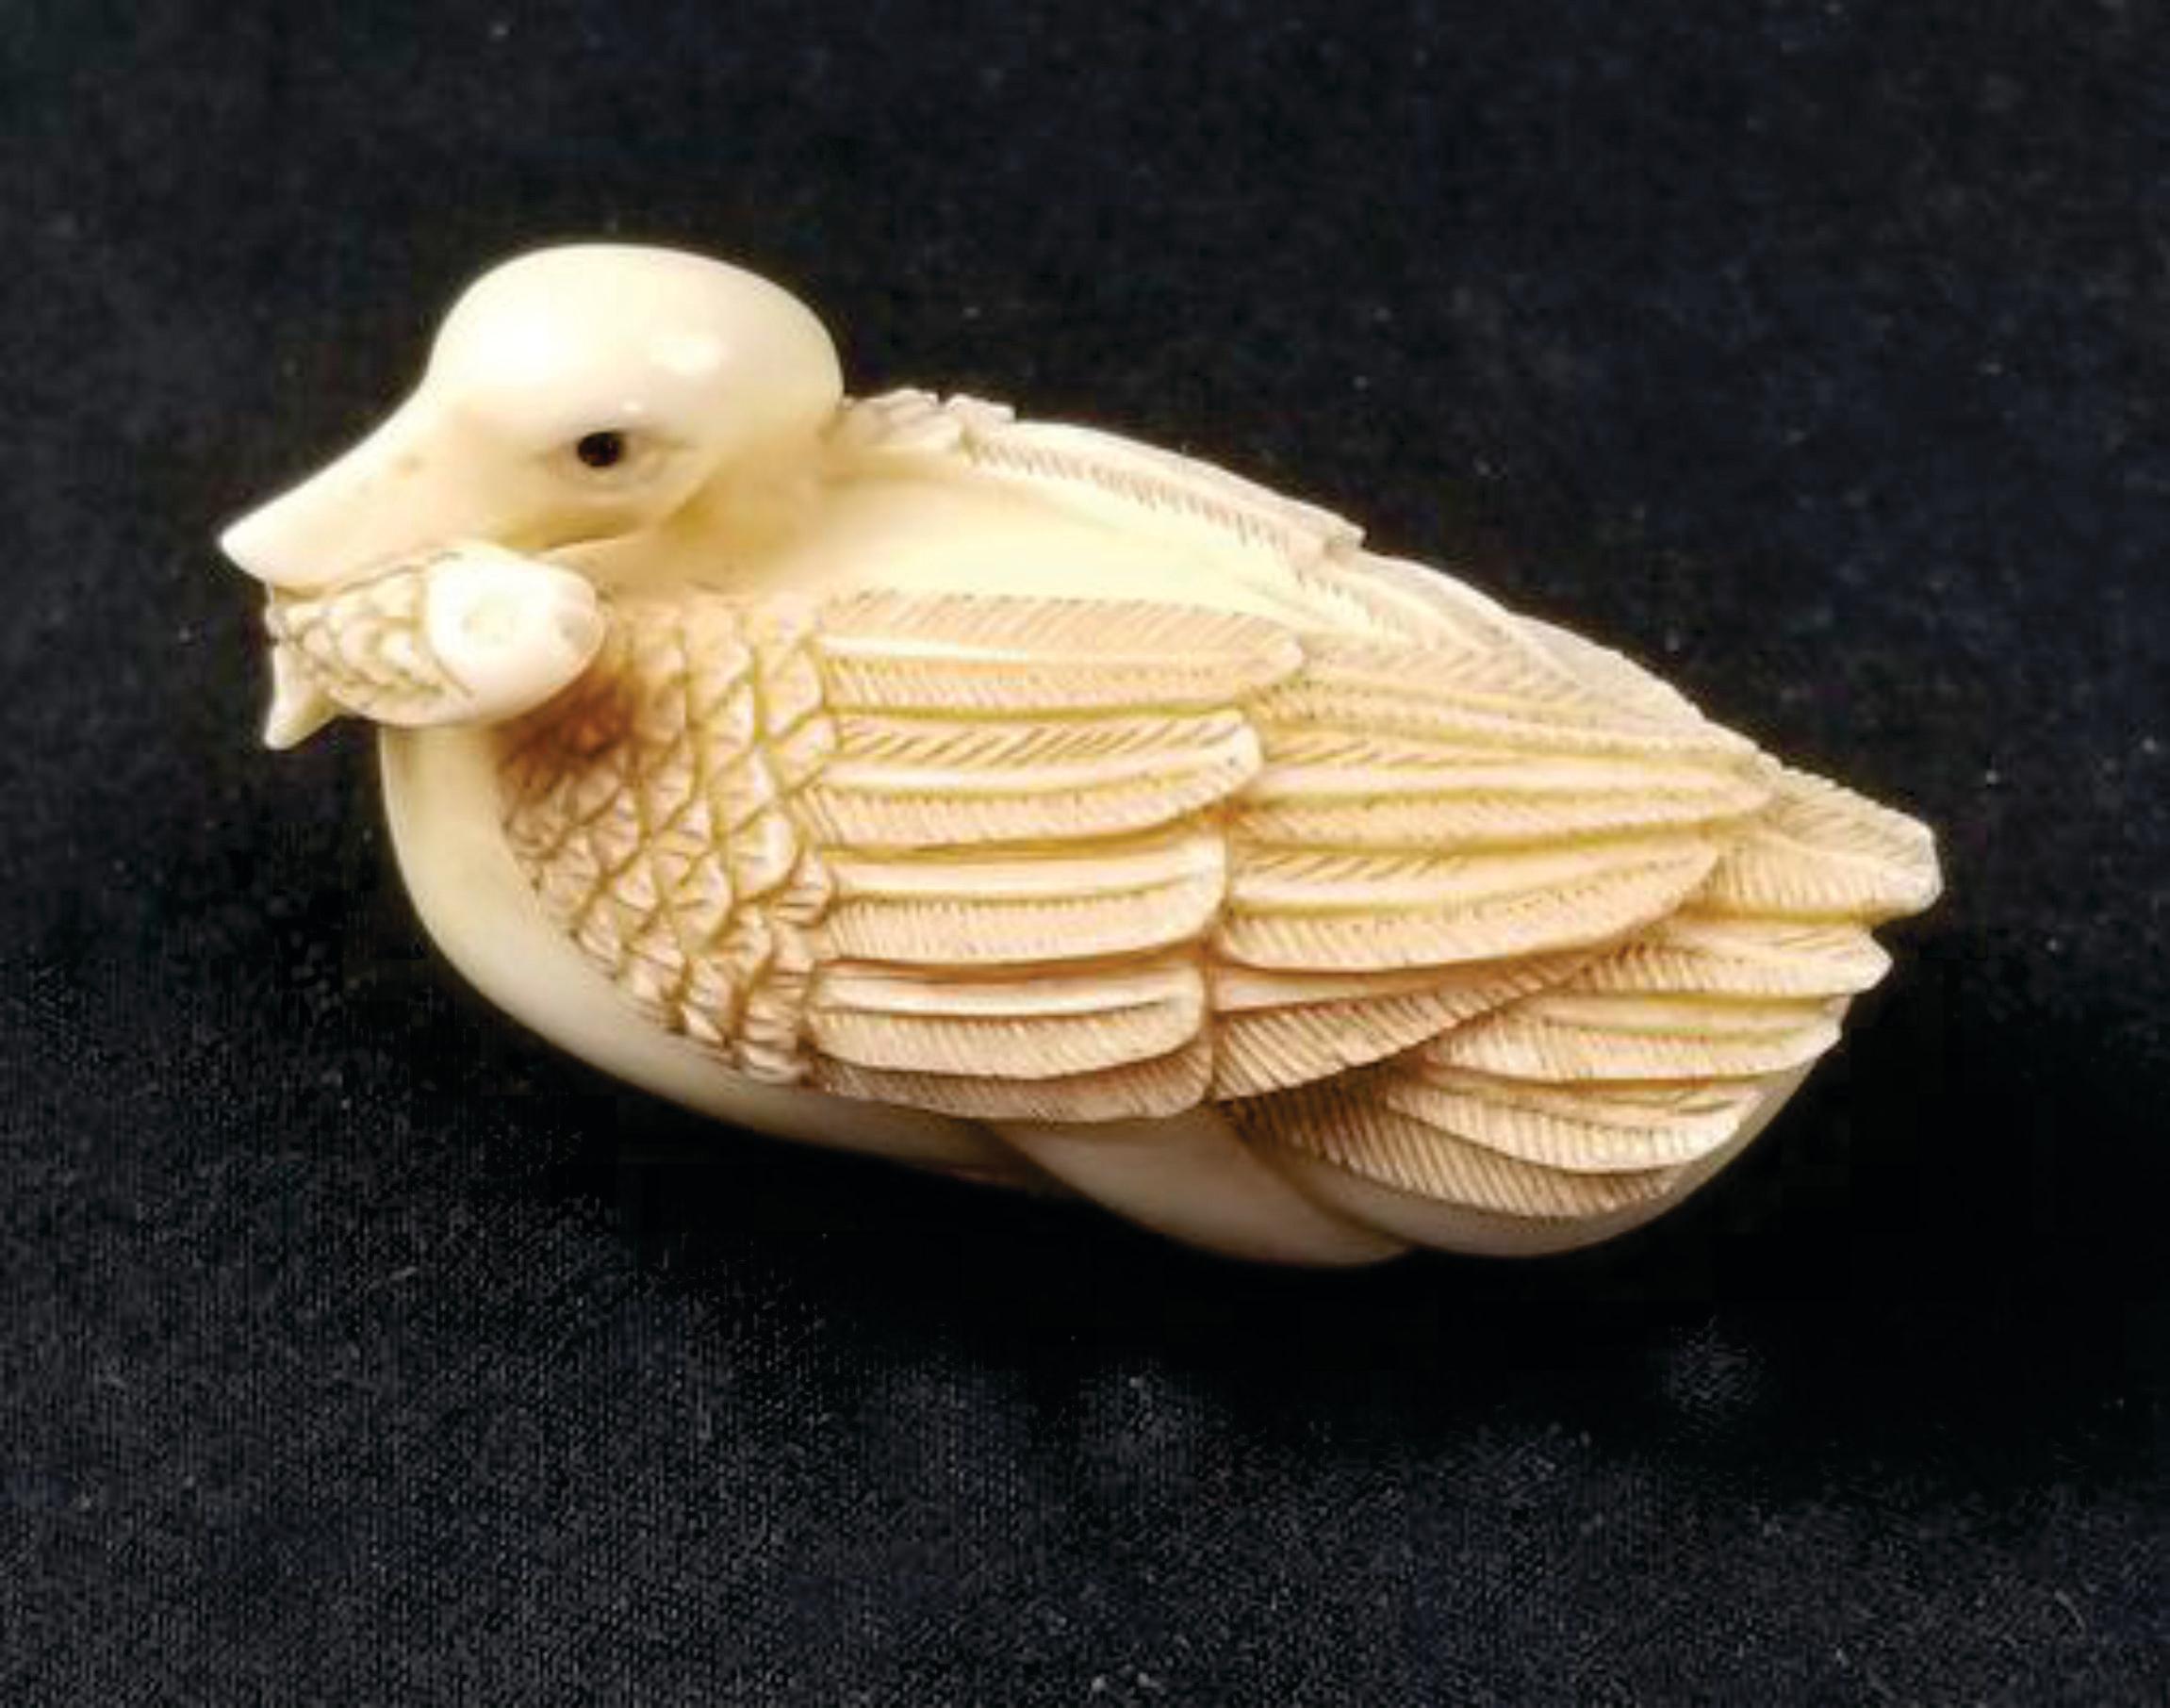 Netsuke Japanese Hand-Carved Mixed Material Figure, A Goose Biting a Fish-Signed by Tomotada from the Meiji period. Ric.NA007

This item is 2